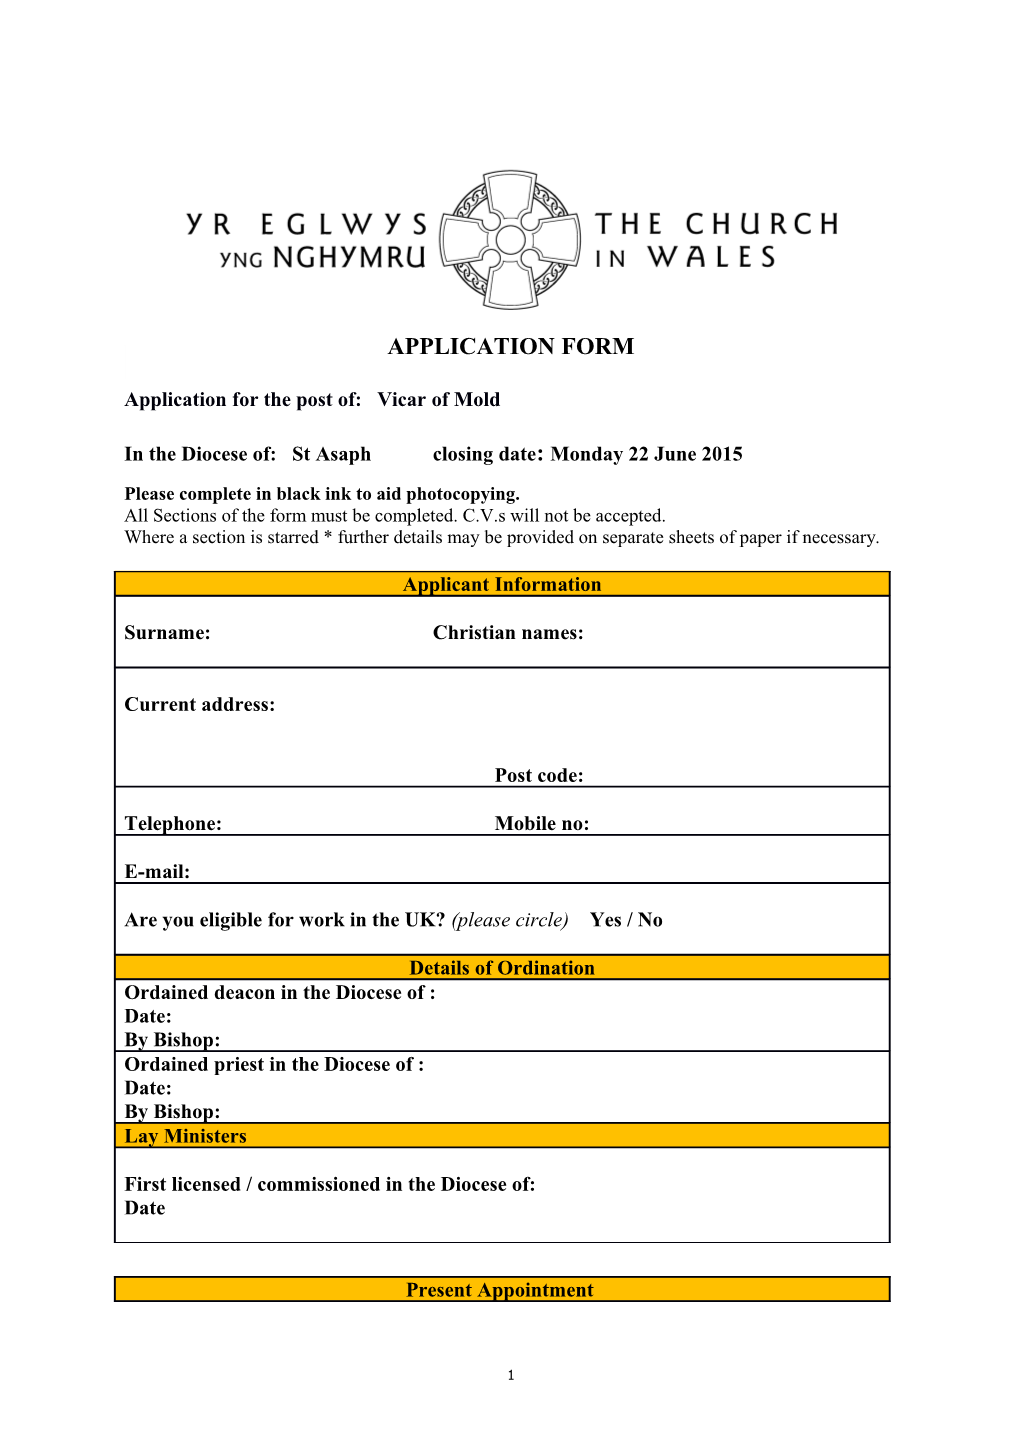 Application for the Post Of: Vicar of Mold